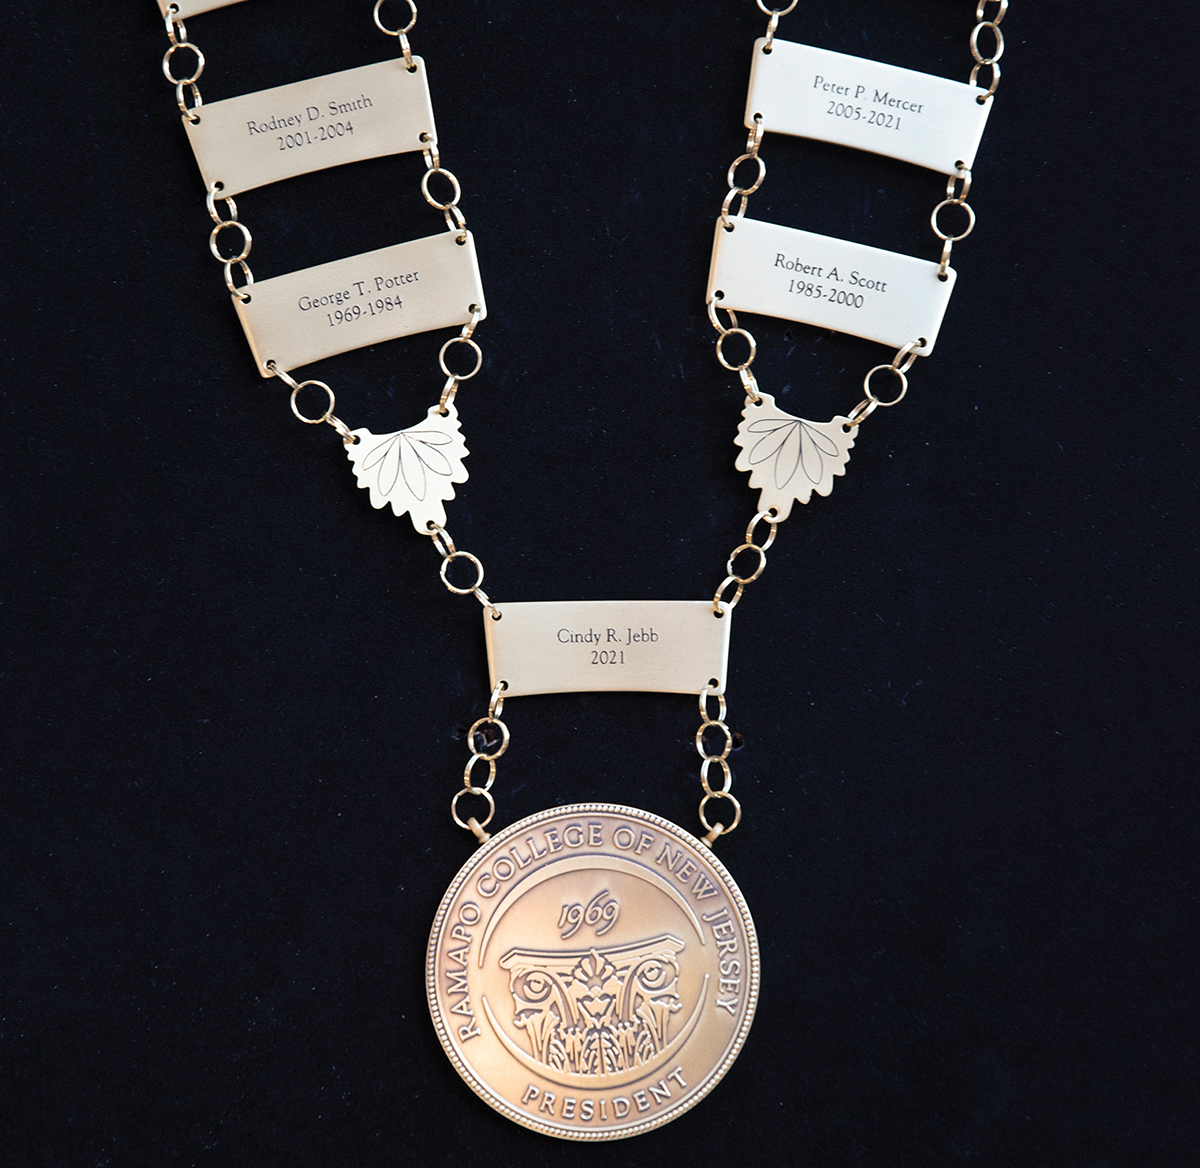 Silver chain with plaques that have RNCJ's past presidents on it, the Ramapo Seal and current president's name